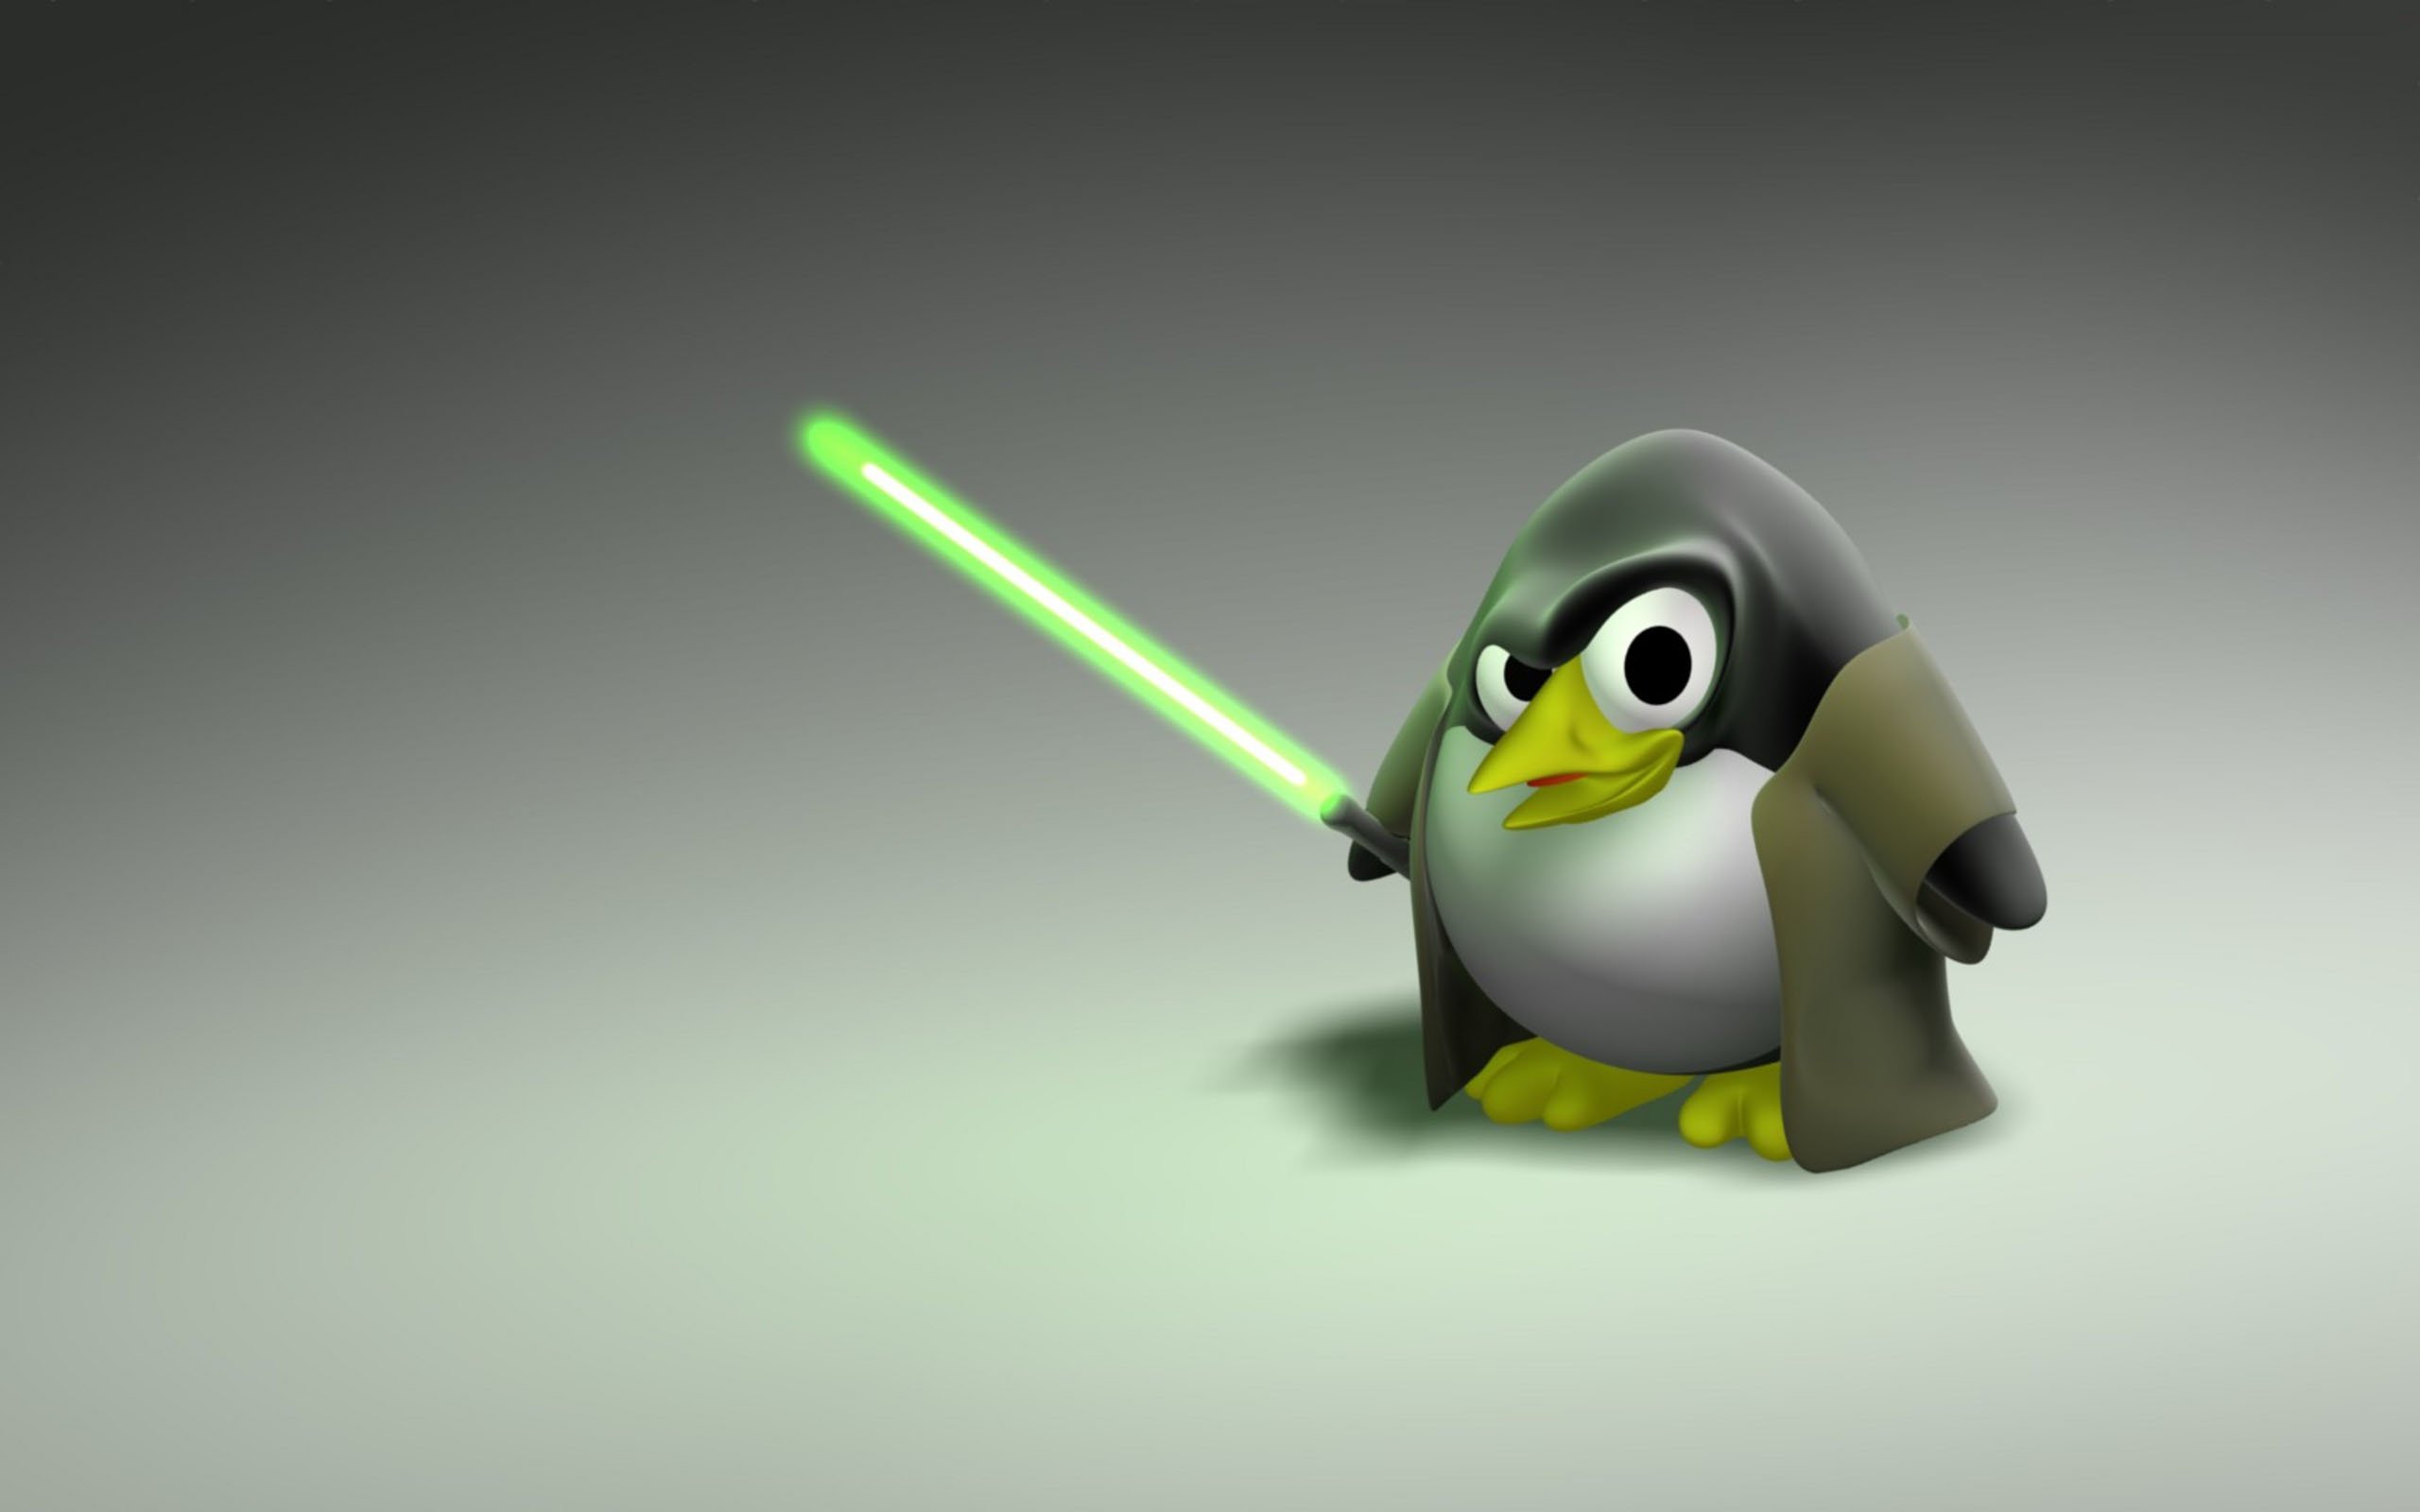  download Download 45 Awesome Linux Wallpapers [2560x1600] for 2560x1600